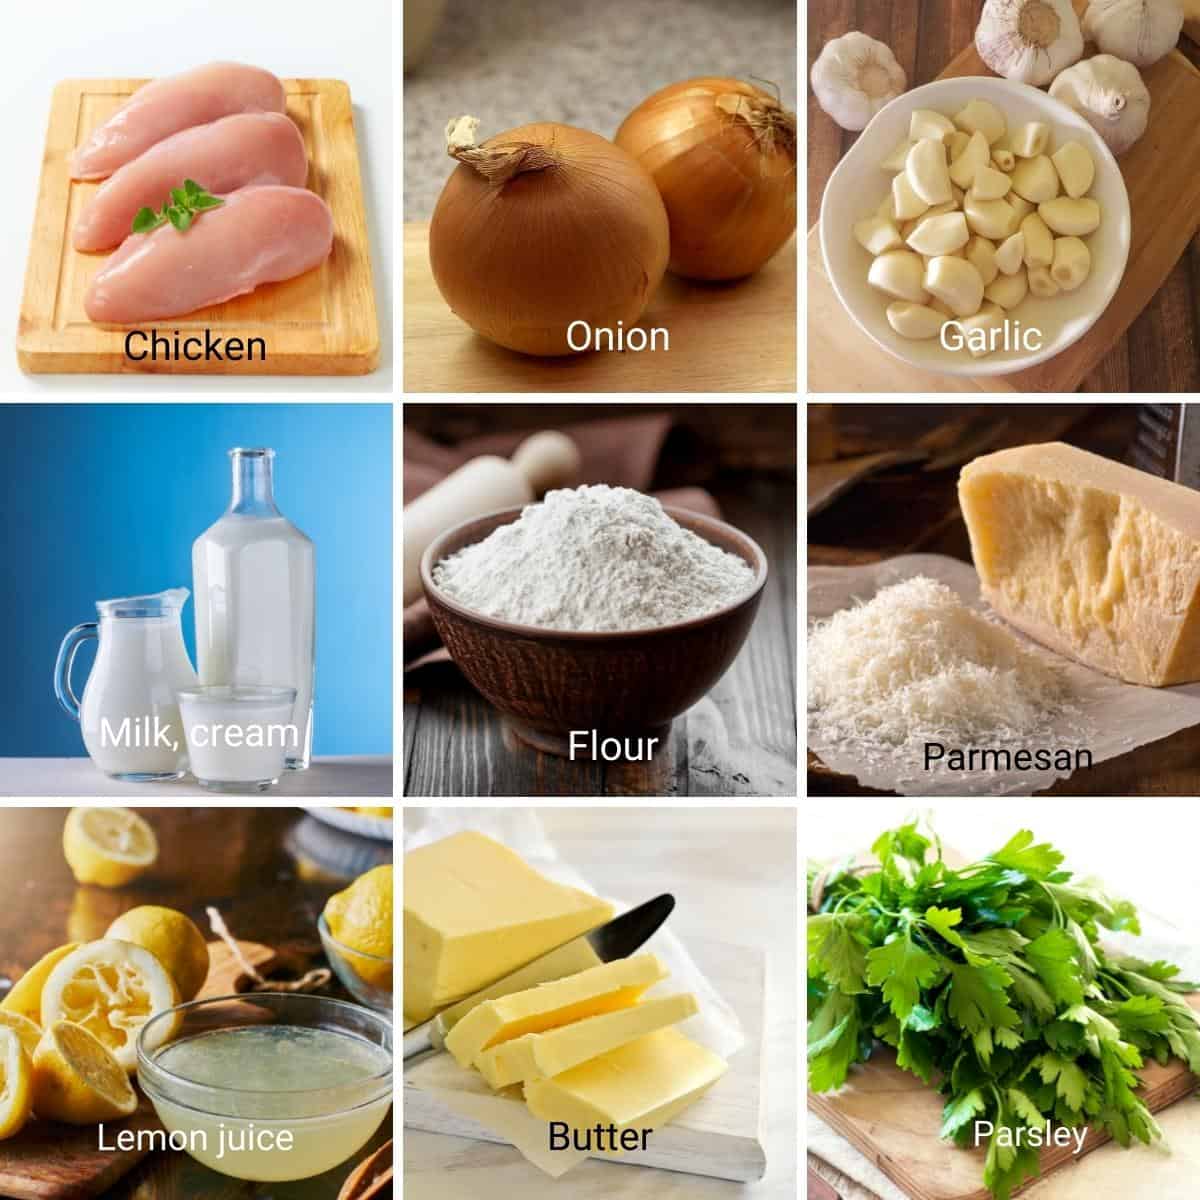 Ingredients for making chicken with white sauce.